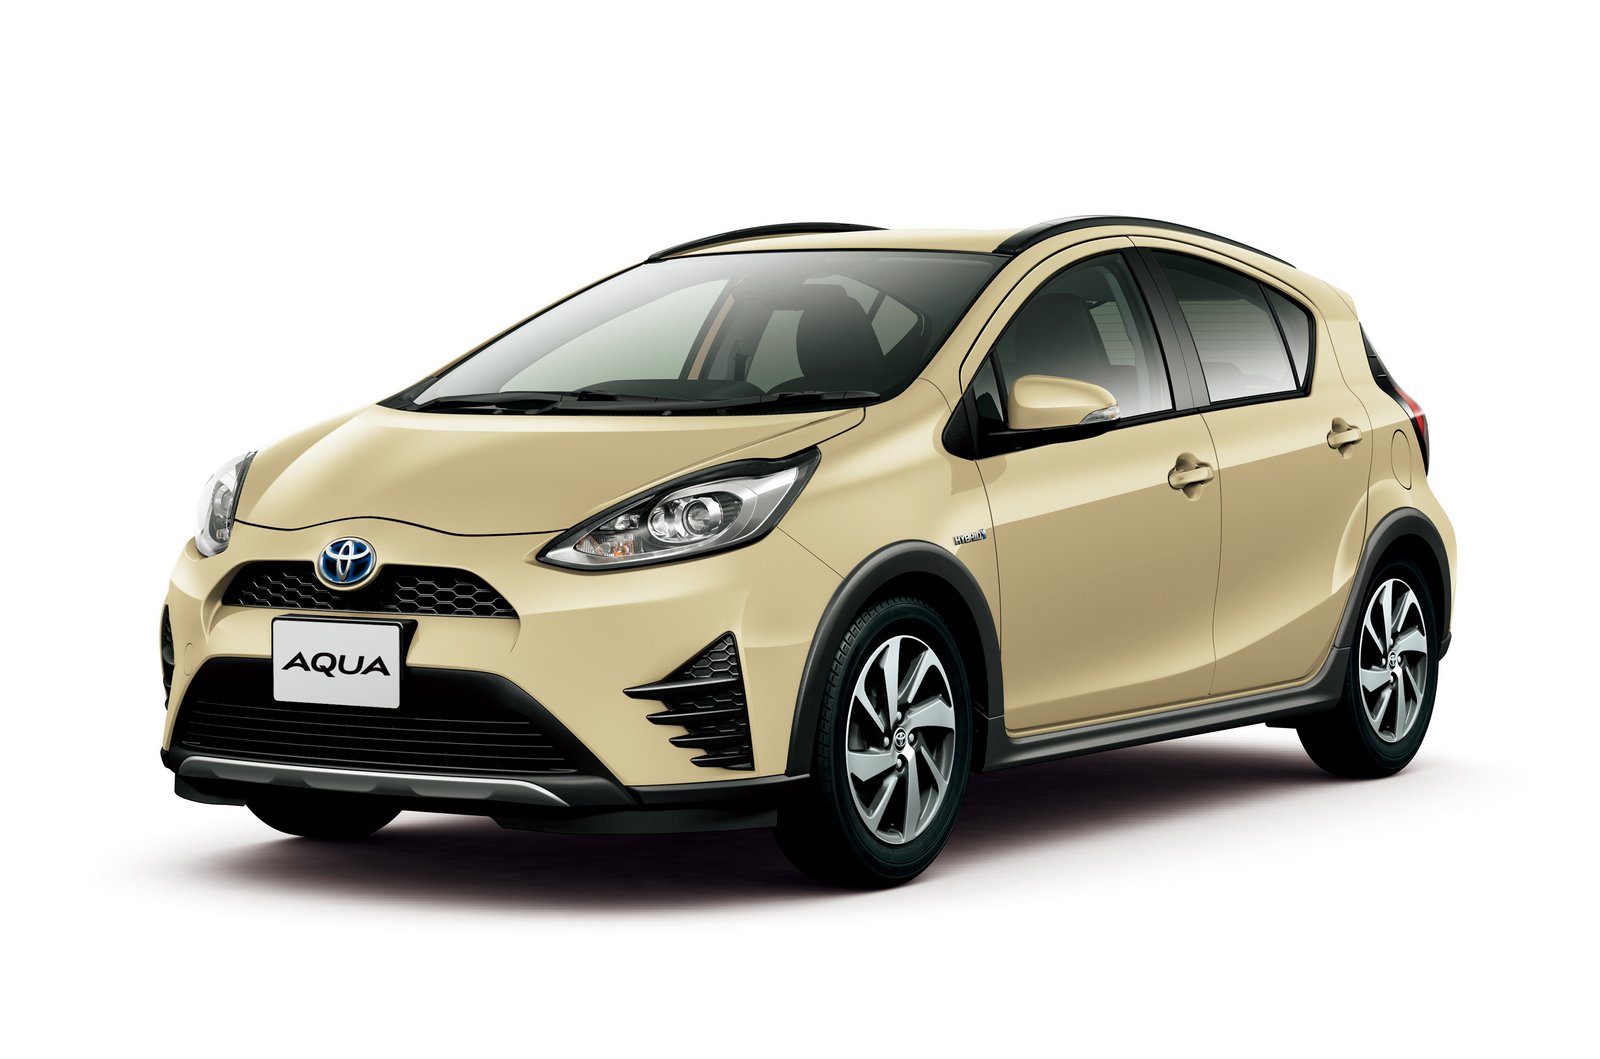 Toyota Aqua Aka The Prius C Gets A Facelift And A New Crossover Variant Carscoops